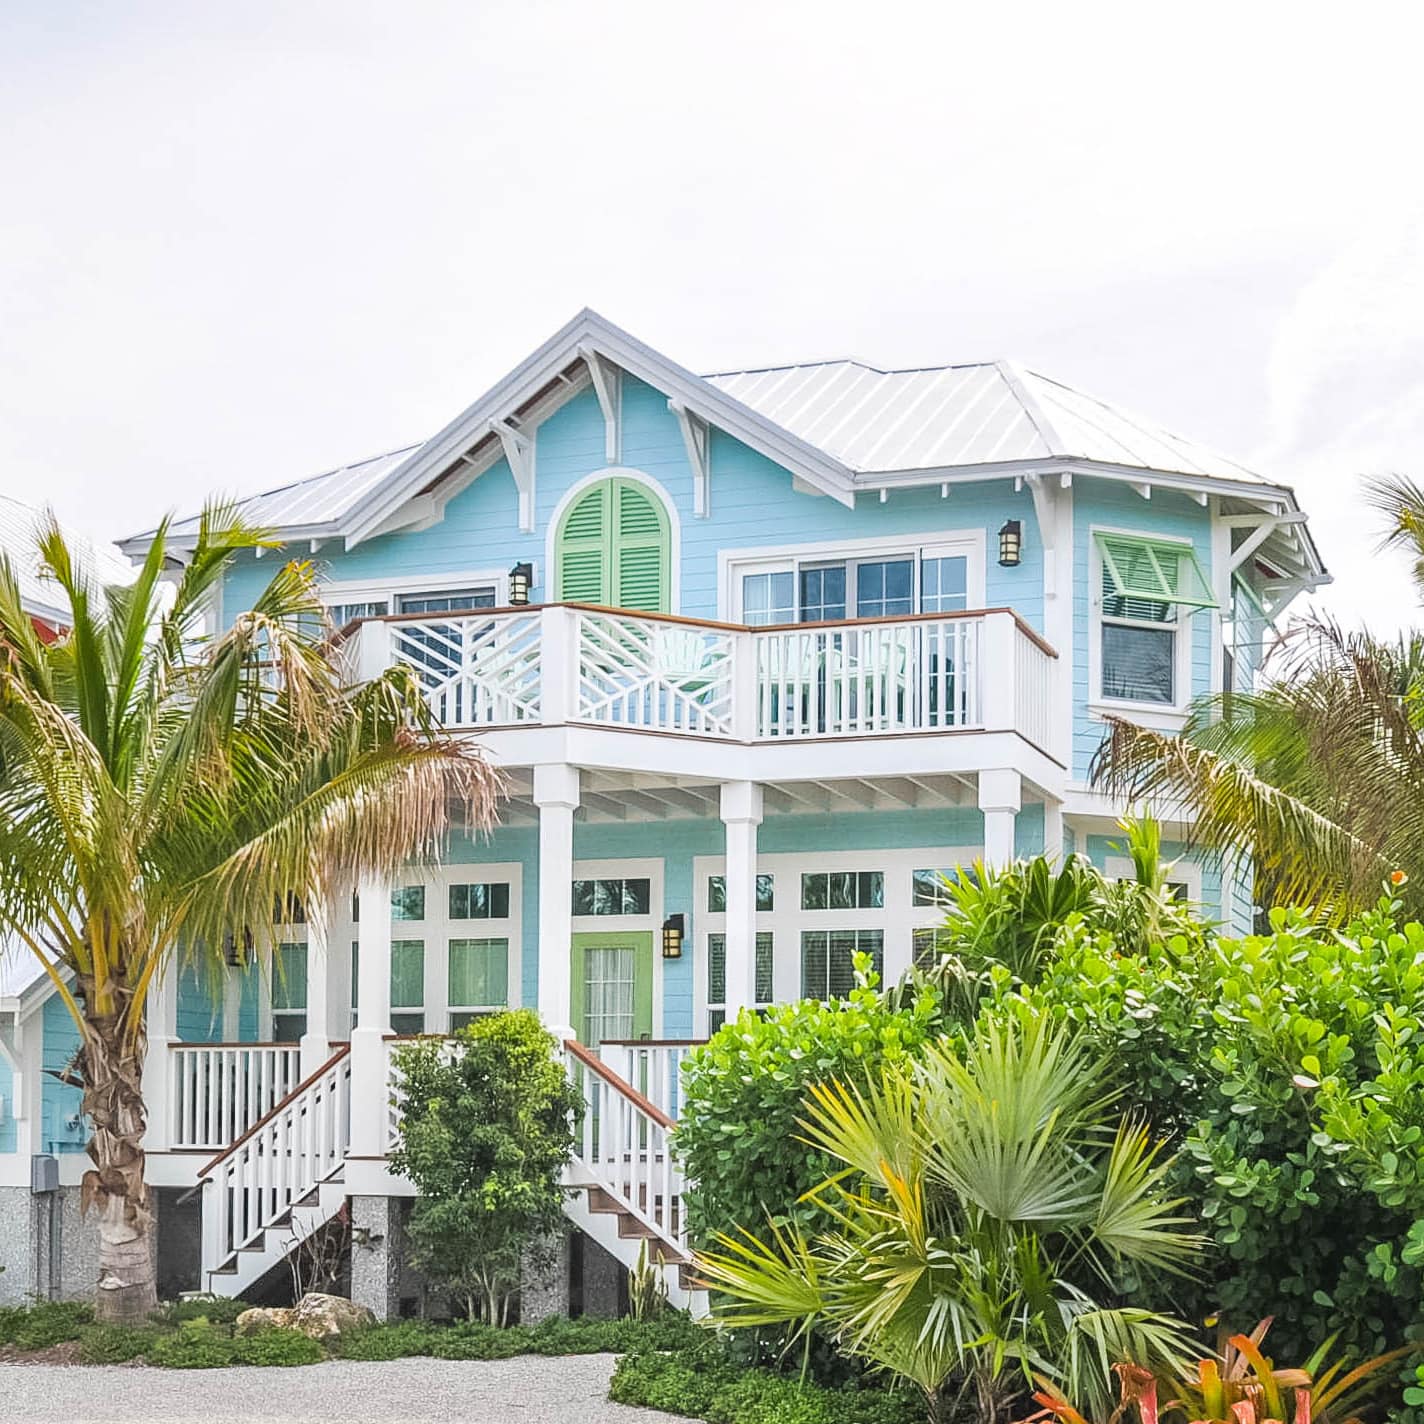 A four-bedroom vacation cottage on Anna Maria Island